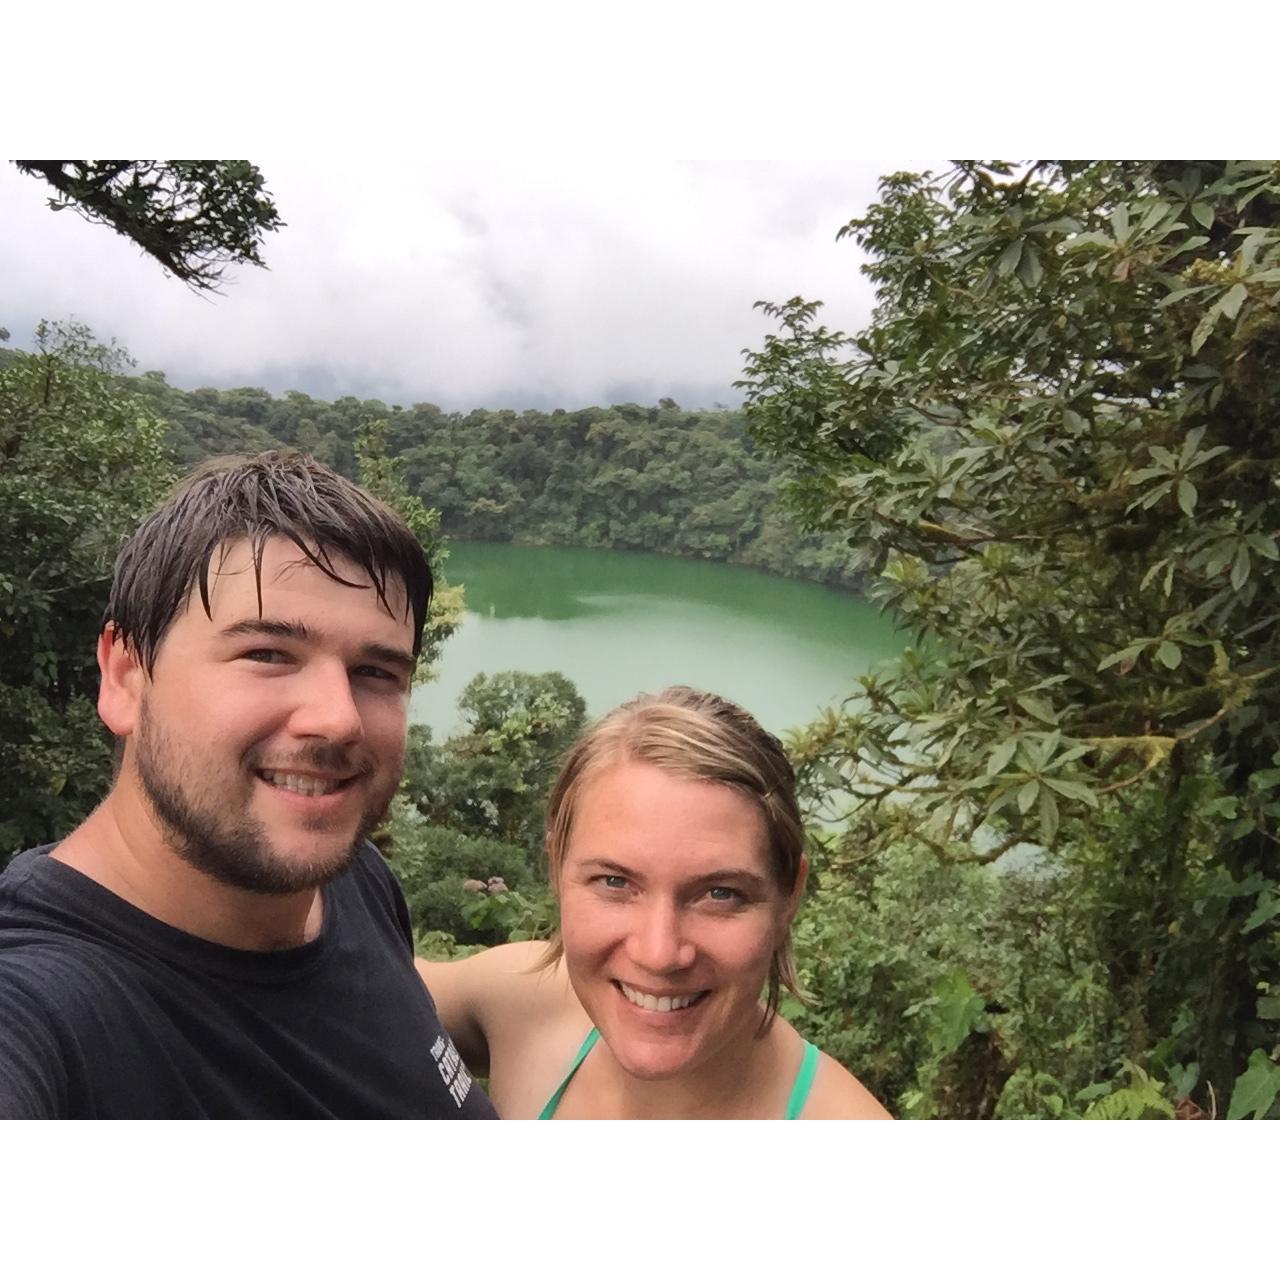 Hiked to the top of a volcano in Costa Rica 2016